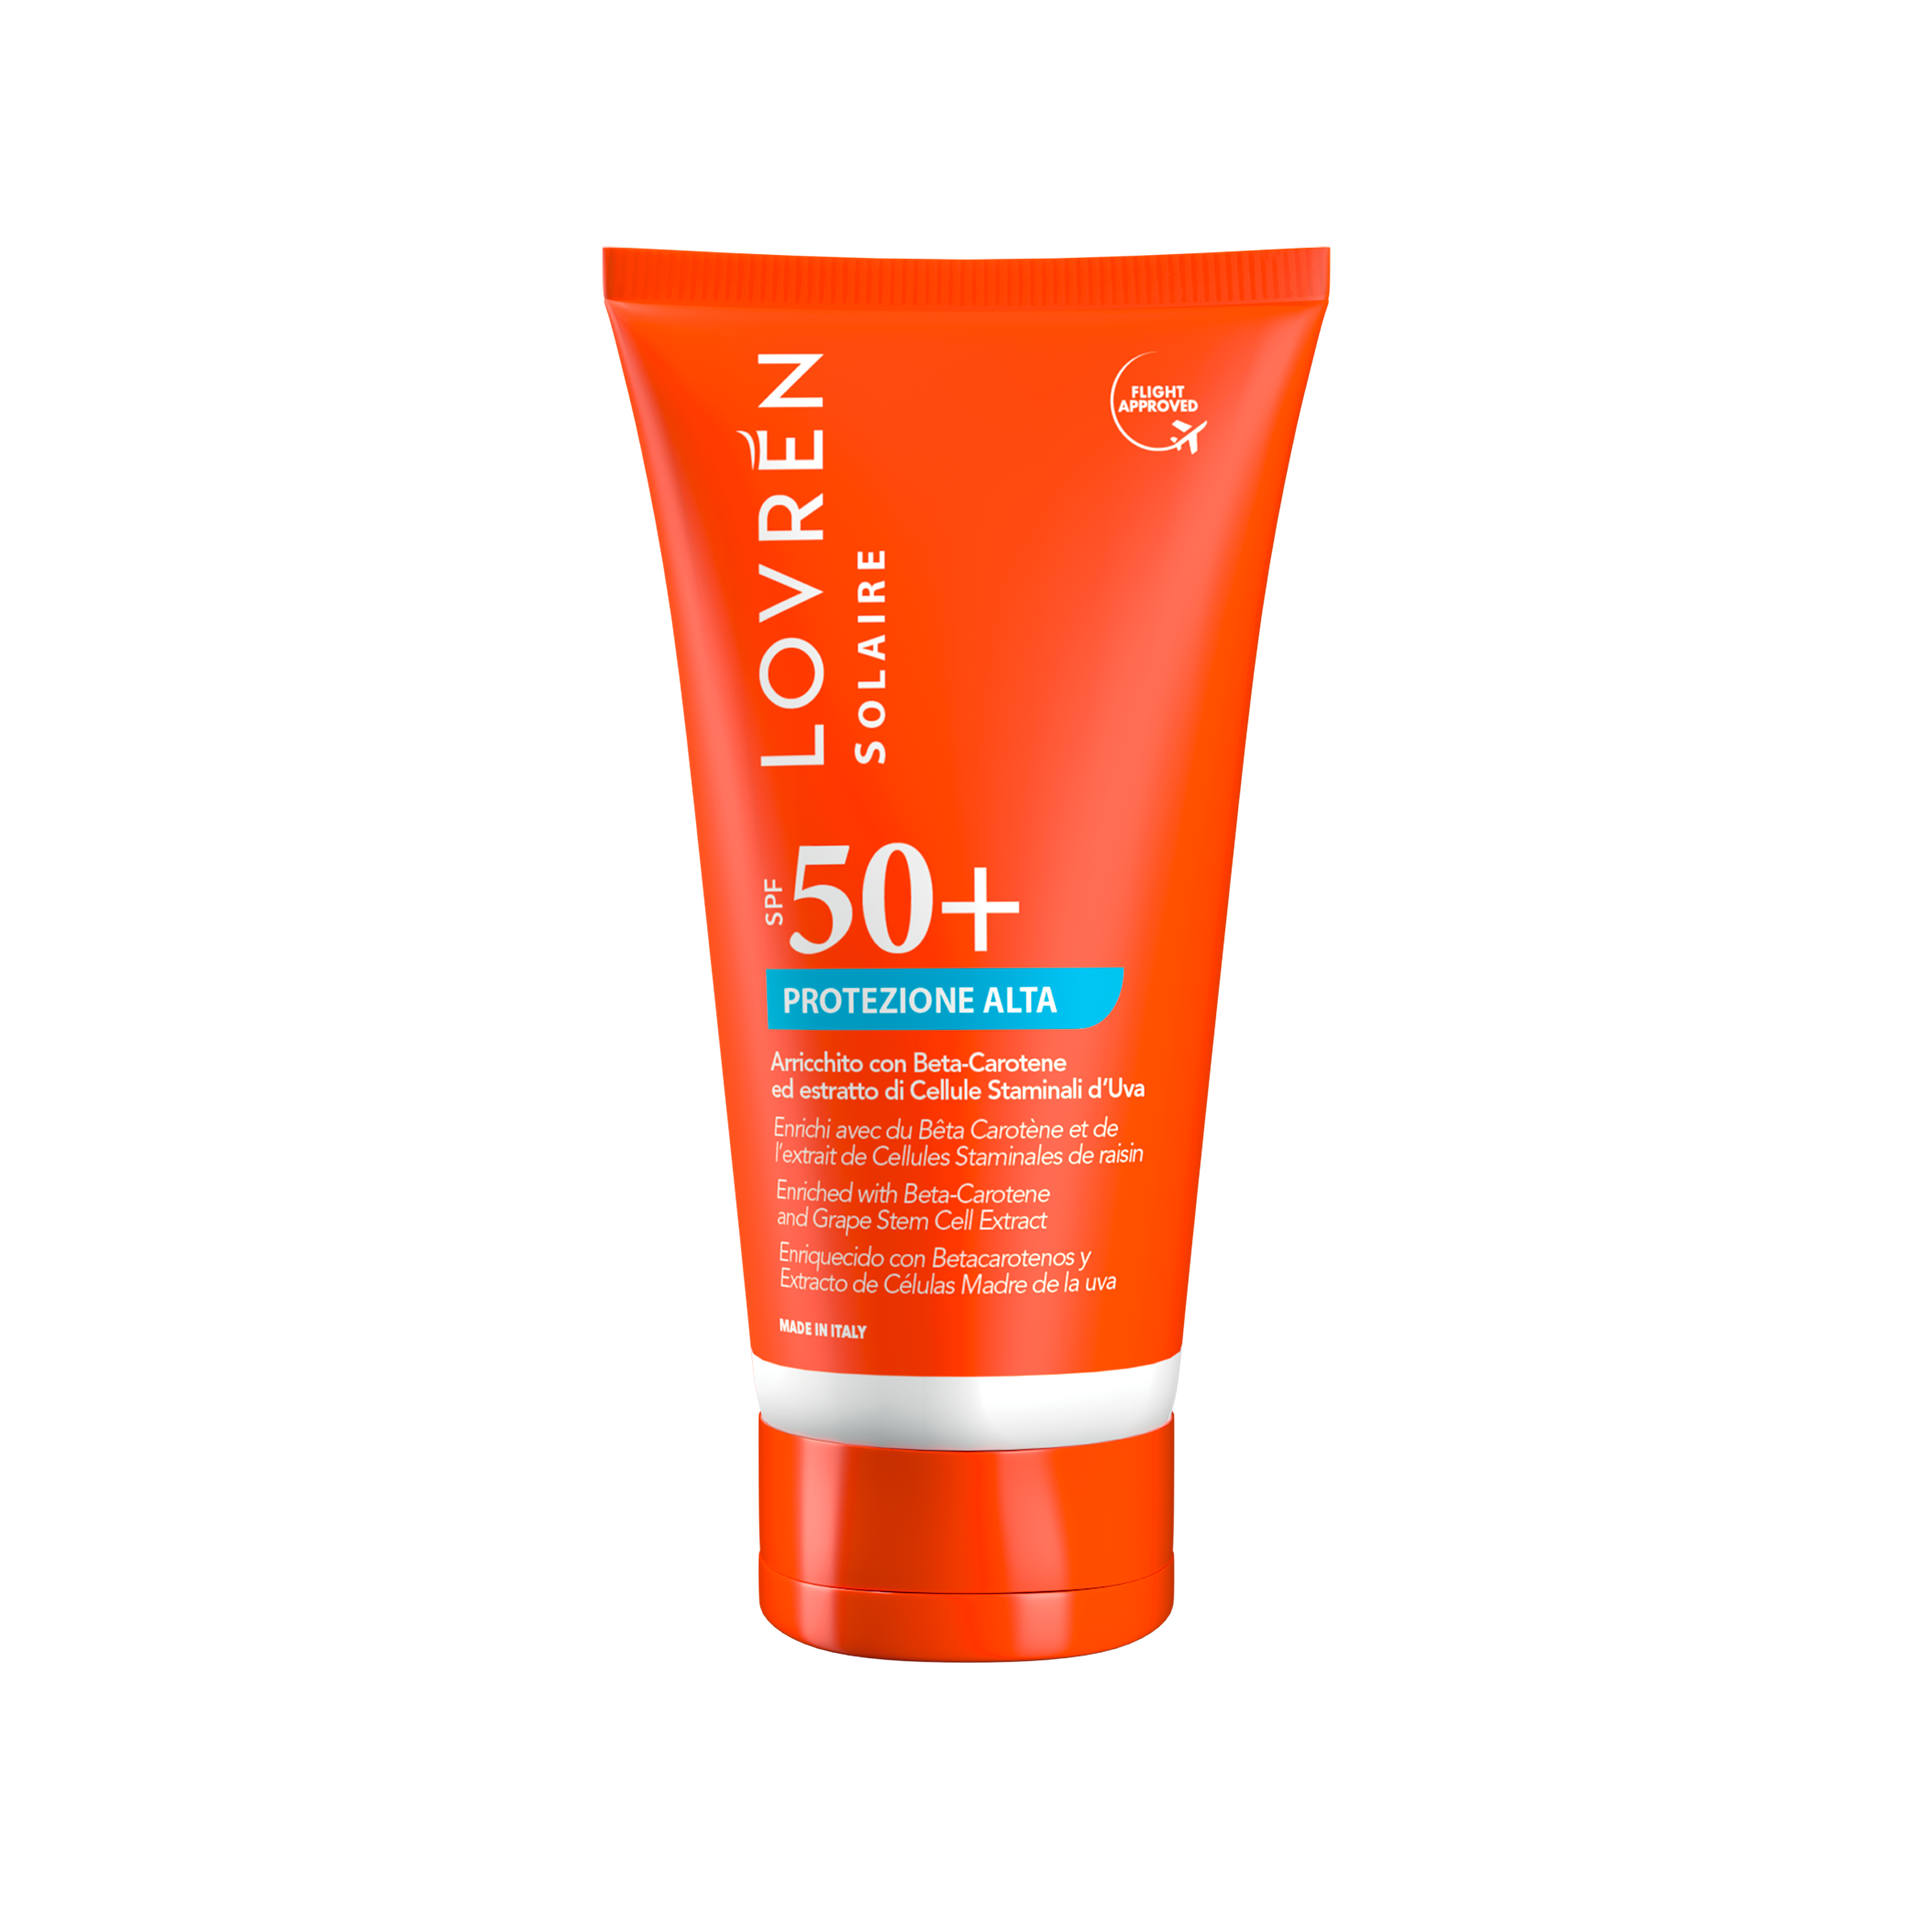 Image of Crema Solare SPF50+ Lovrén Solaire 100ml